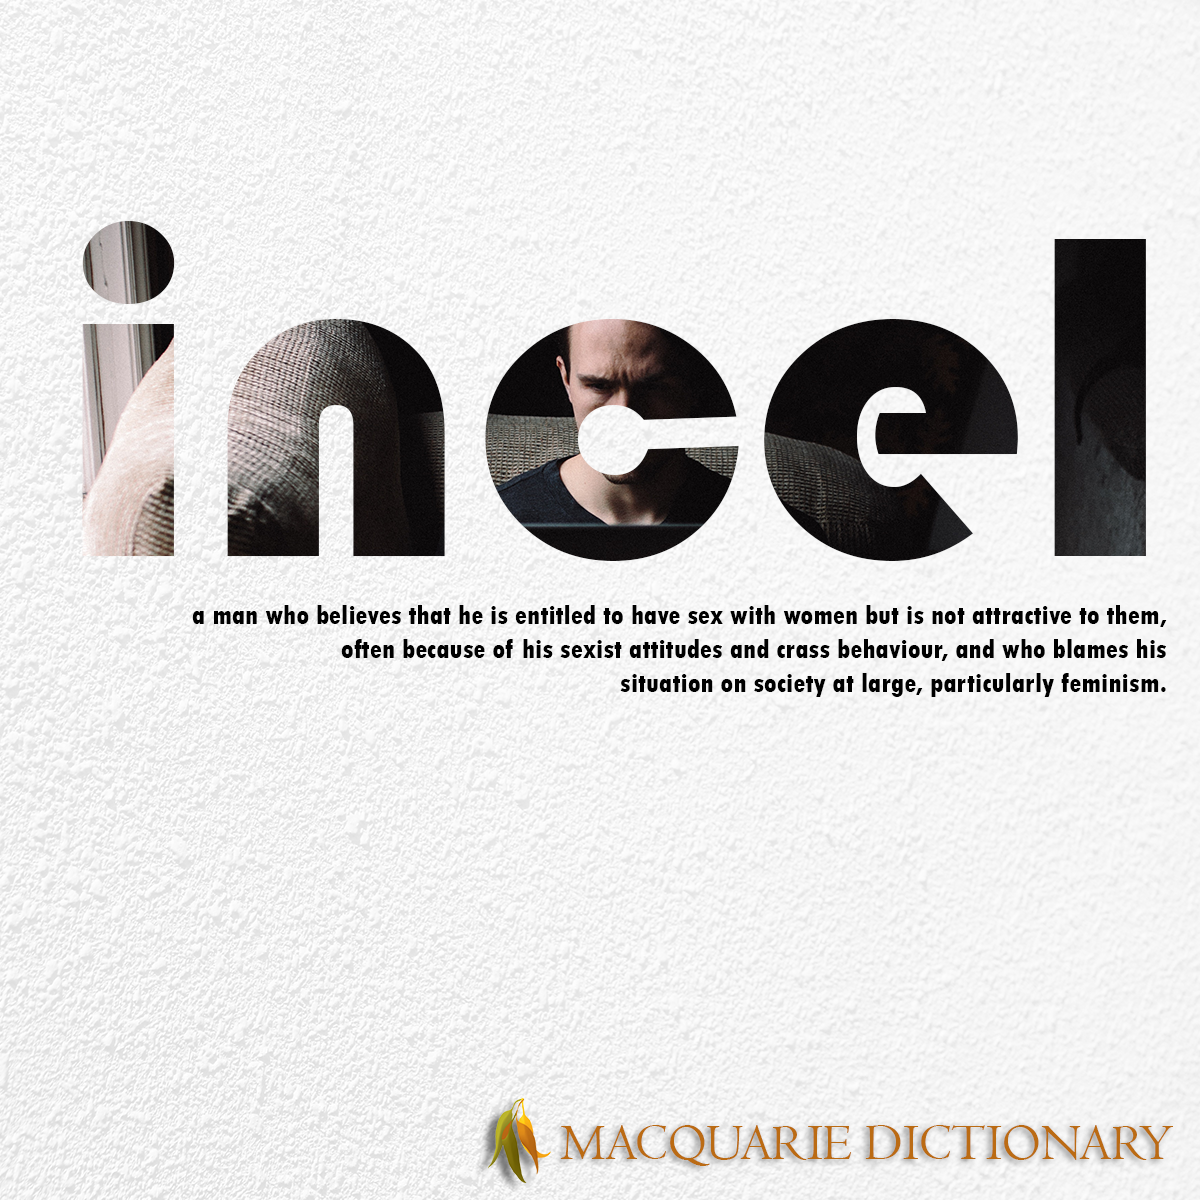 Image of Macquarie Dictionary Word of the Year - incel - a man who believes that he is entitled to have sex with women but is not attractive to them, often because of his sexist attitudes and crass behaviour, and who blames his situation on society at large, particularly feminism.